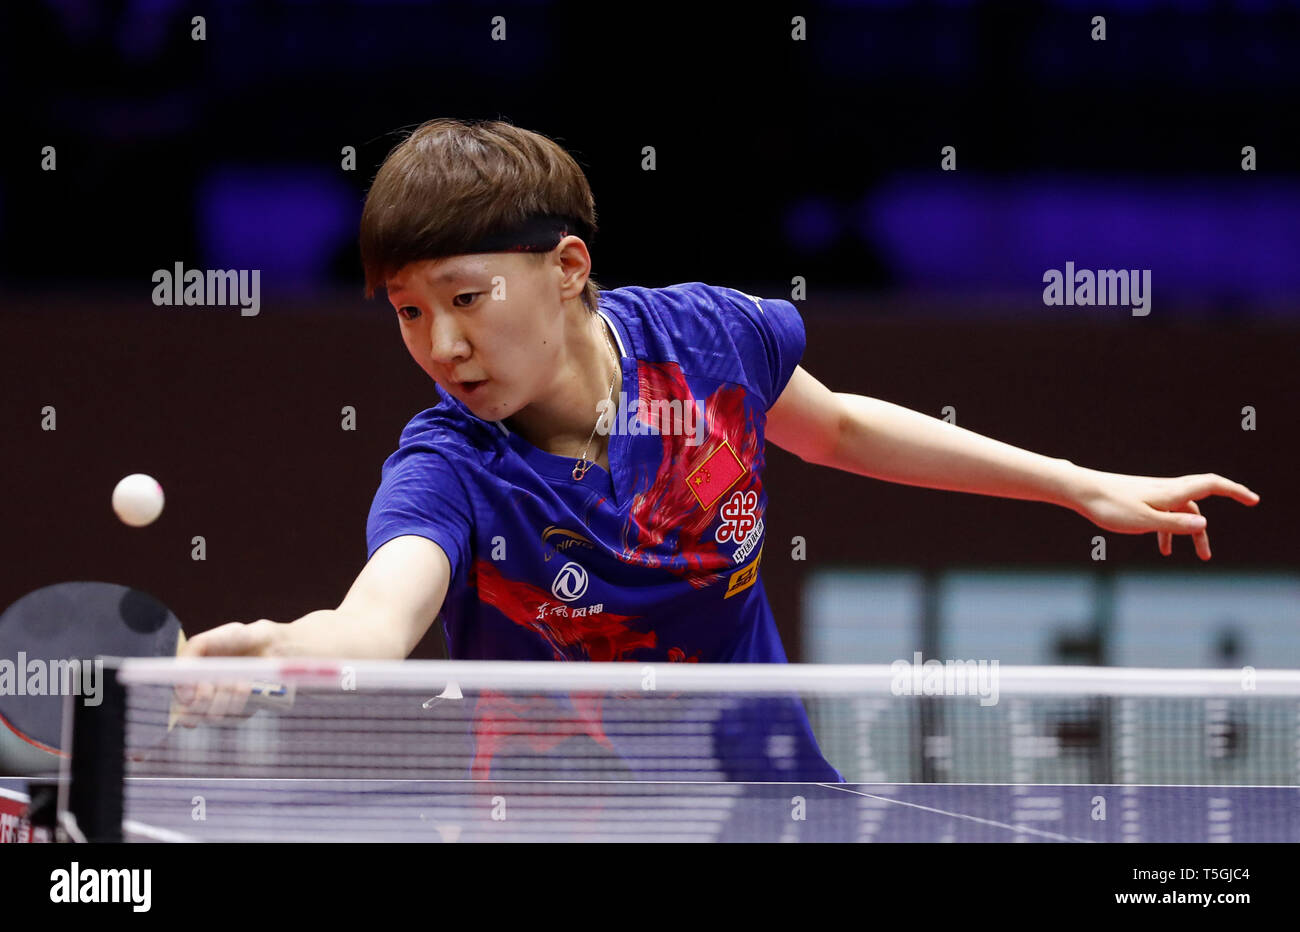 (190425) -- BUDAPEST, April 25, 2019 (Xinhua) -- Wang Manyu of China competes during the women's singles round of 16 match against Hitomi Sato of Japan at 2019 ITTF World Table Tennis Championships in Budapest, Hungary, April 24, 2019. (Xinhua/Han Yan) Stock Photo